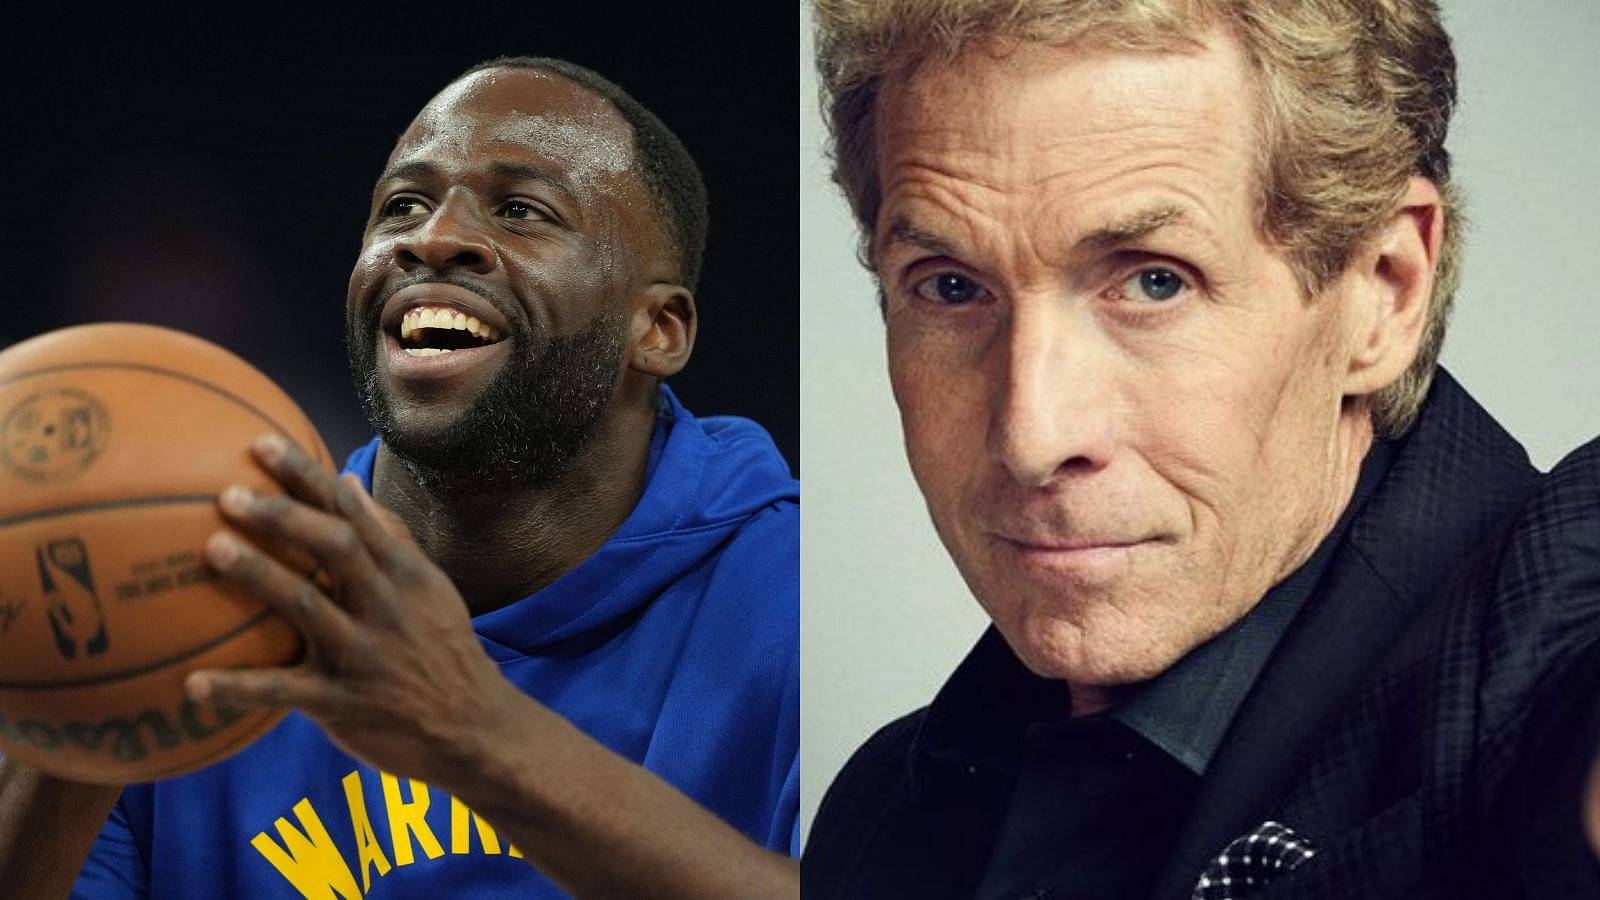 “Draymond Green, you keep running from me! I'm still waiting to hear back”: Skip Bayless calls out Warriors star yet again to discuss their issues ‘man to man’